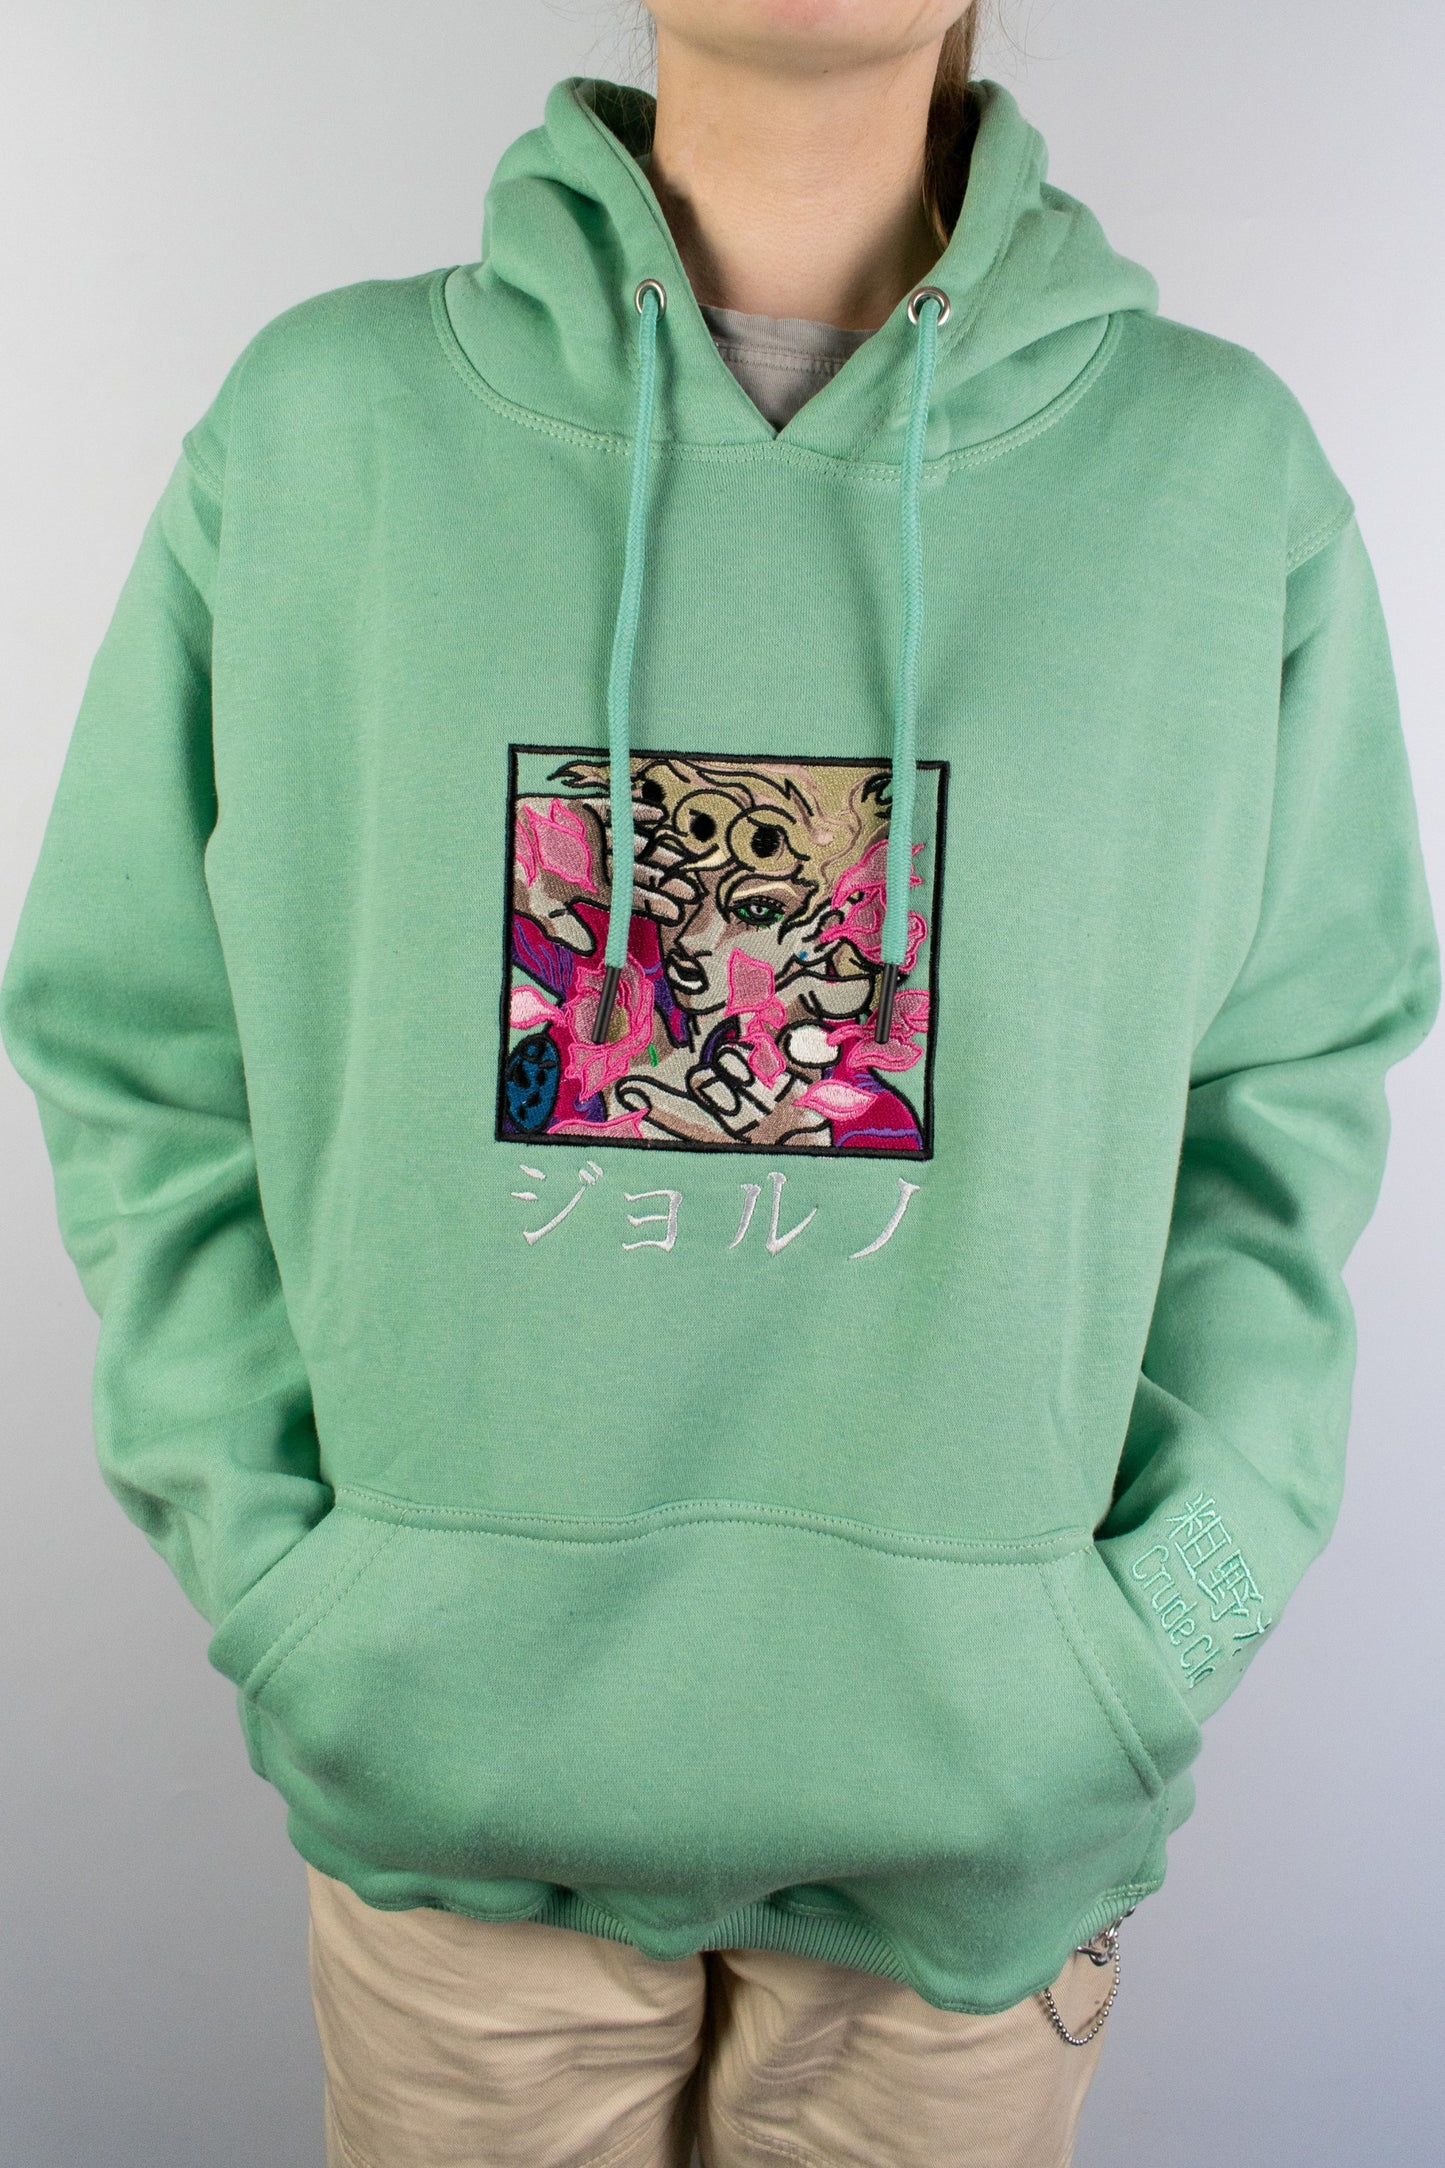 Giorno Giovanna Mint Embroidered Hoodie